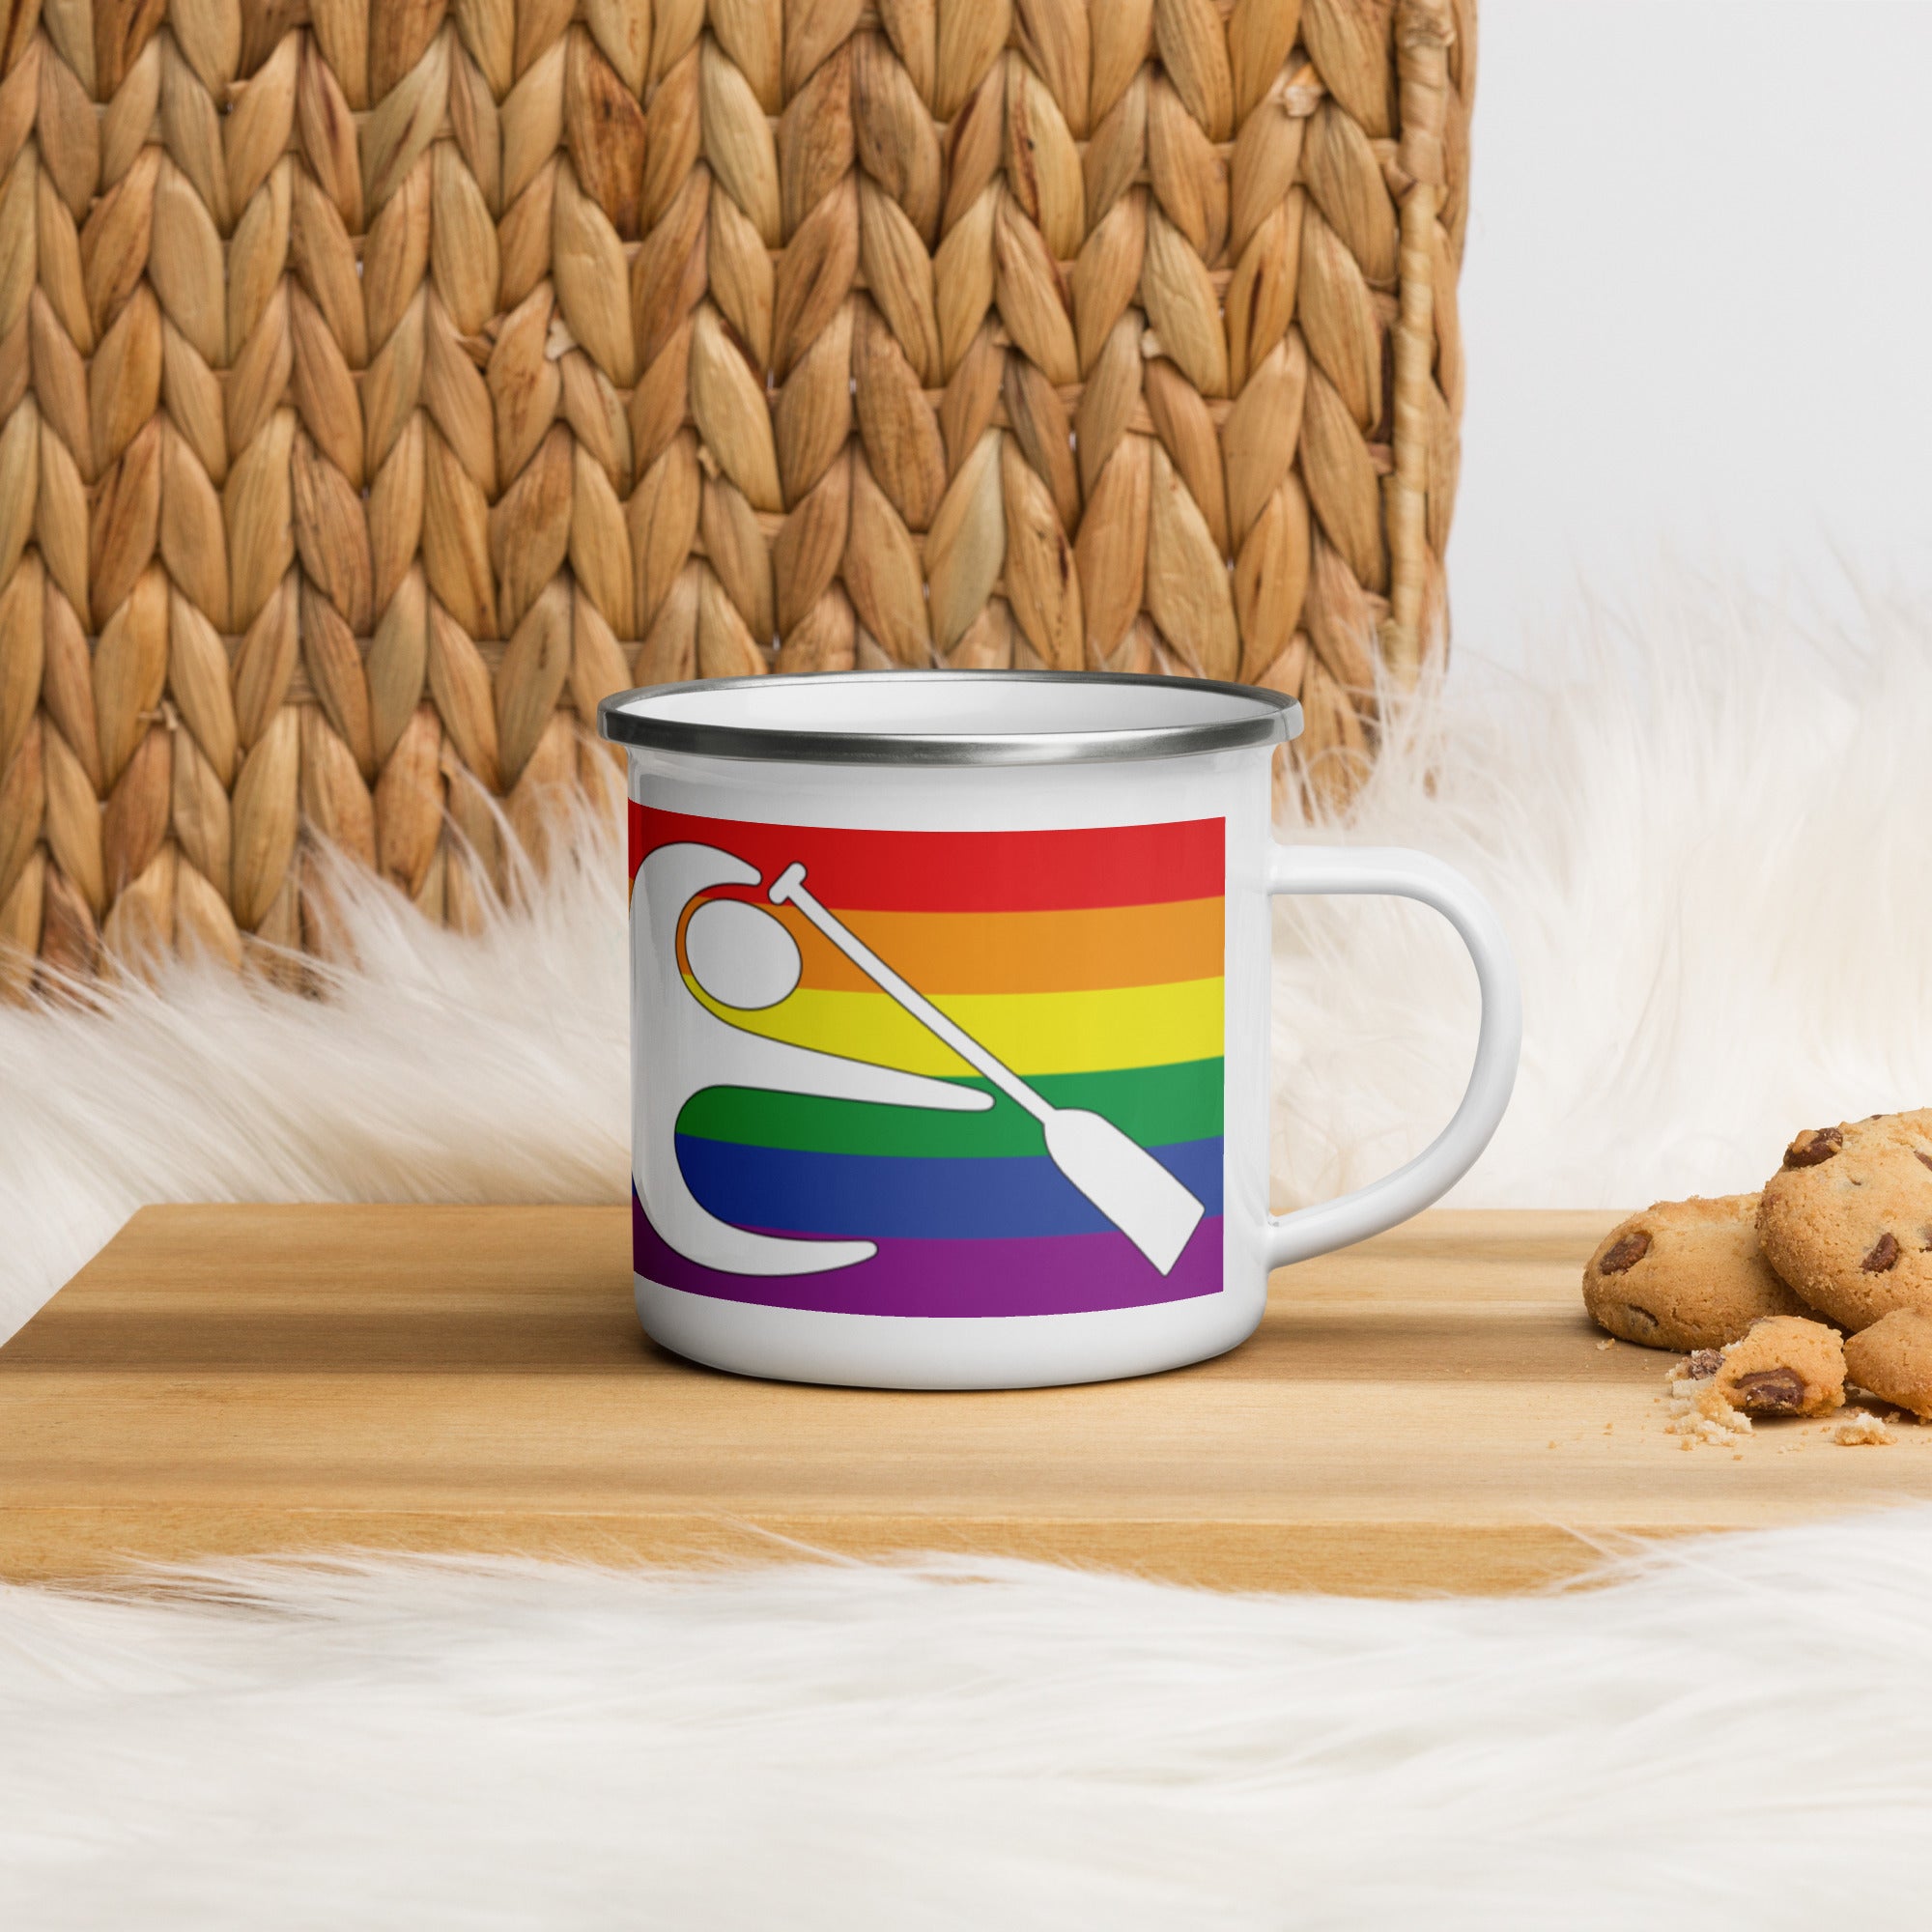 Paddles Up For Pride! What a great gift idea! Every Dragon Boat racer needs a unique mug. This one is lightweight, durable and multifunctional. They can use it for their favorite beverage or a hot meal, and attach it to their bag for easy access. 